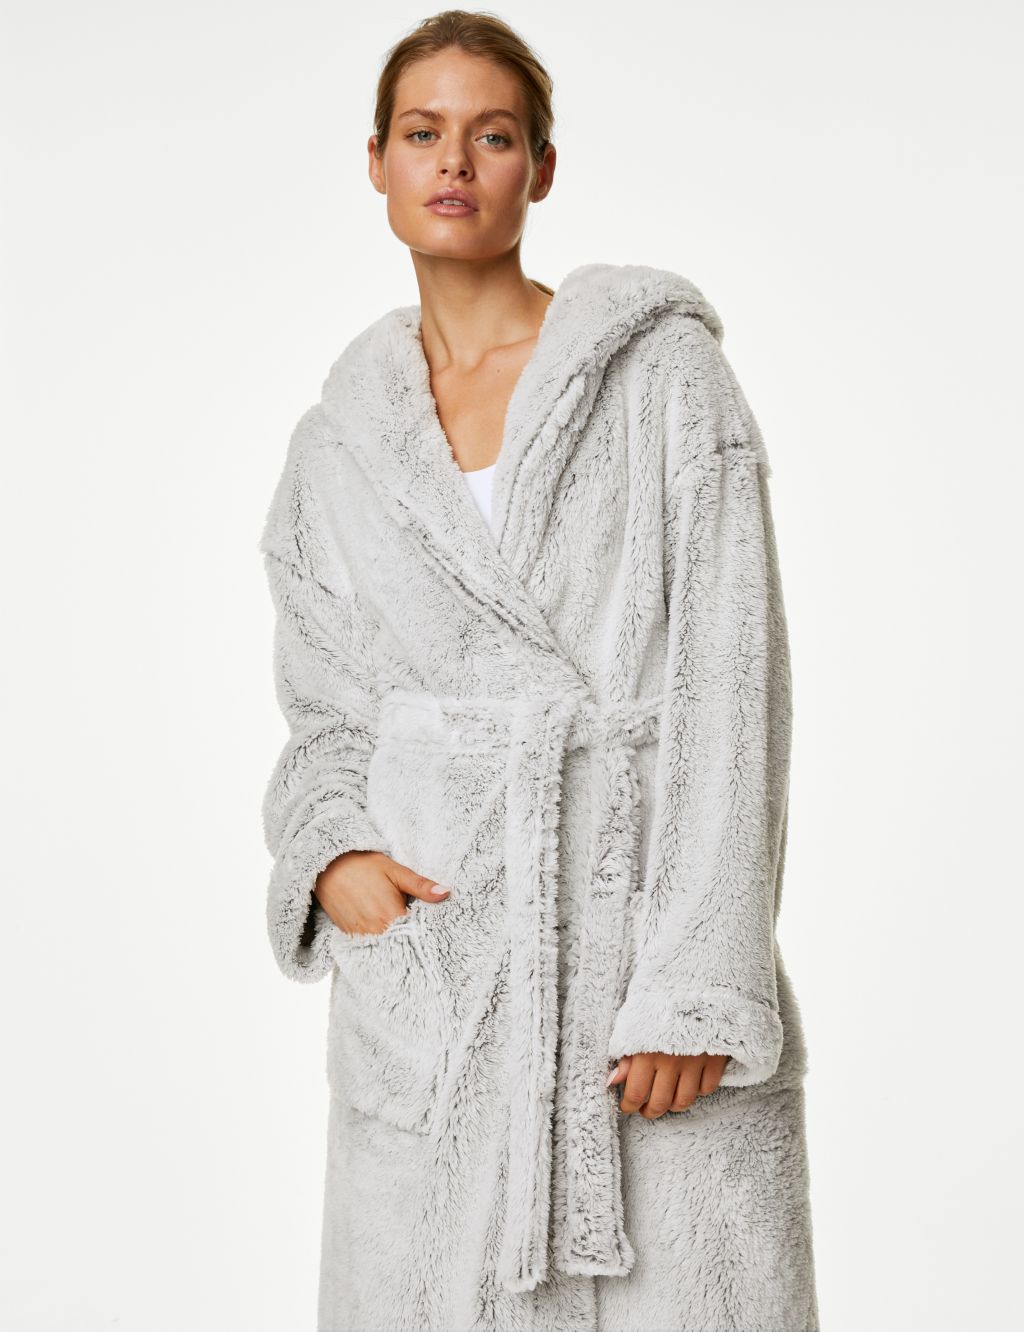 Fleece Hooded Dressing Gown image 1